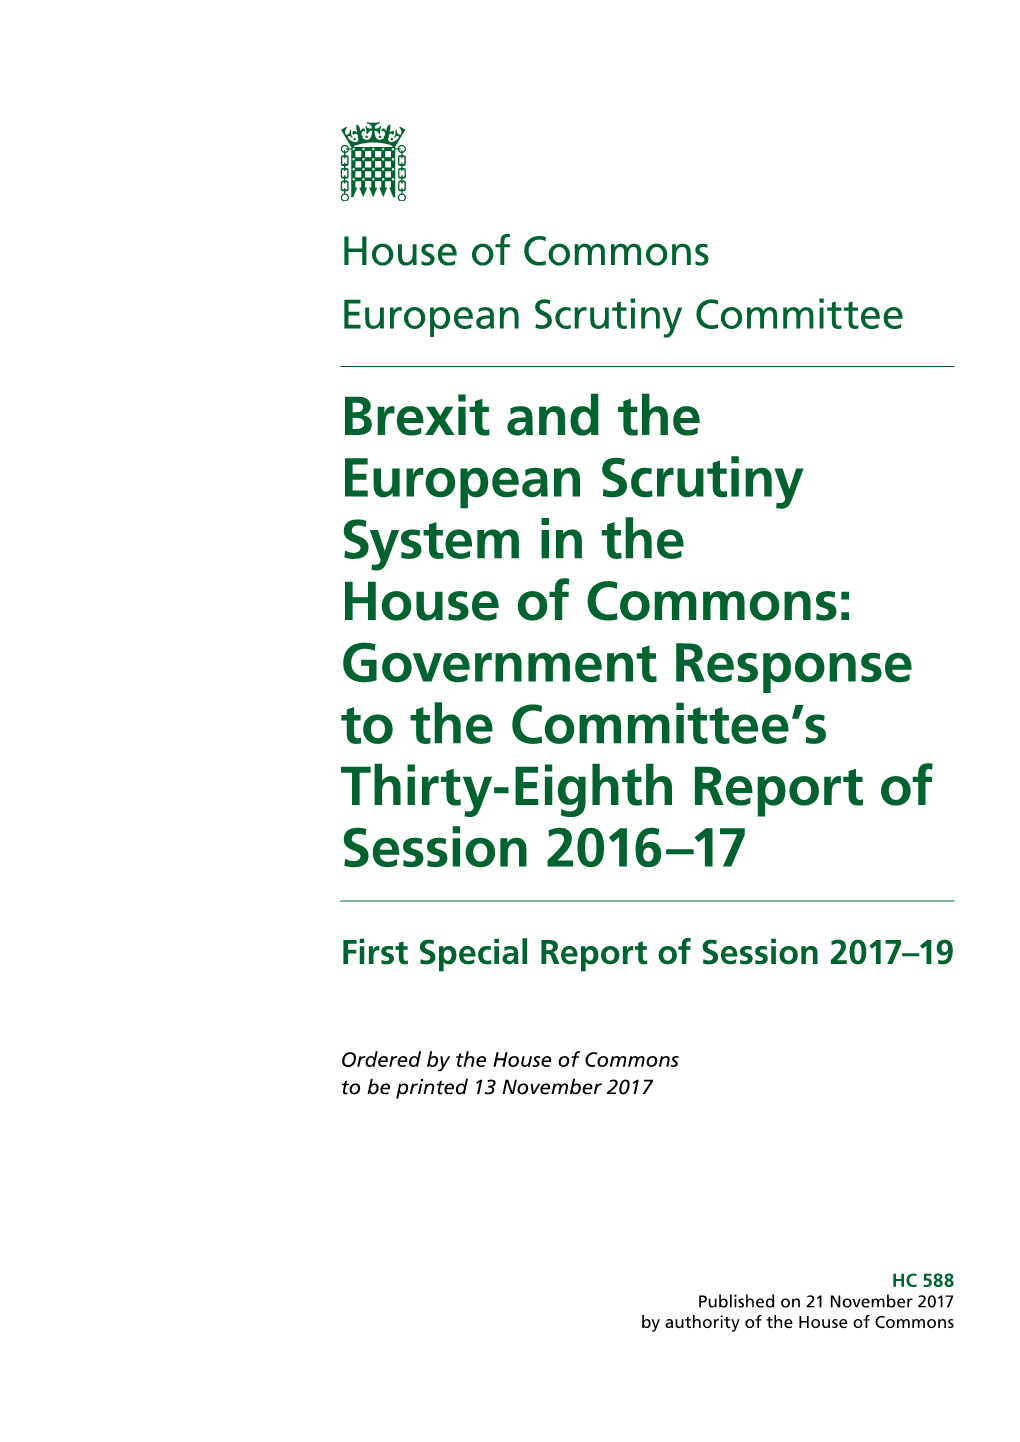 Brexit and the European Scrutiny System in the House of Commons: Government Response to the Committee’S Thirty-Eighth Report of Session 2016–17